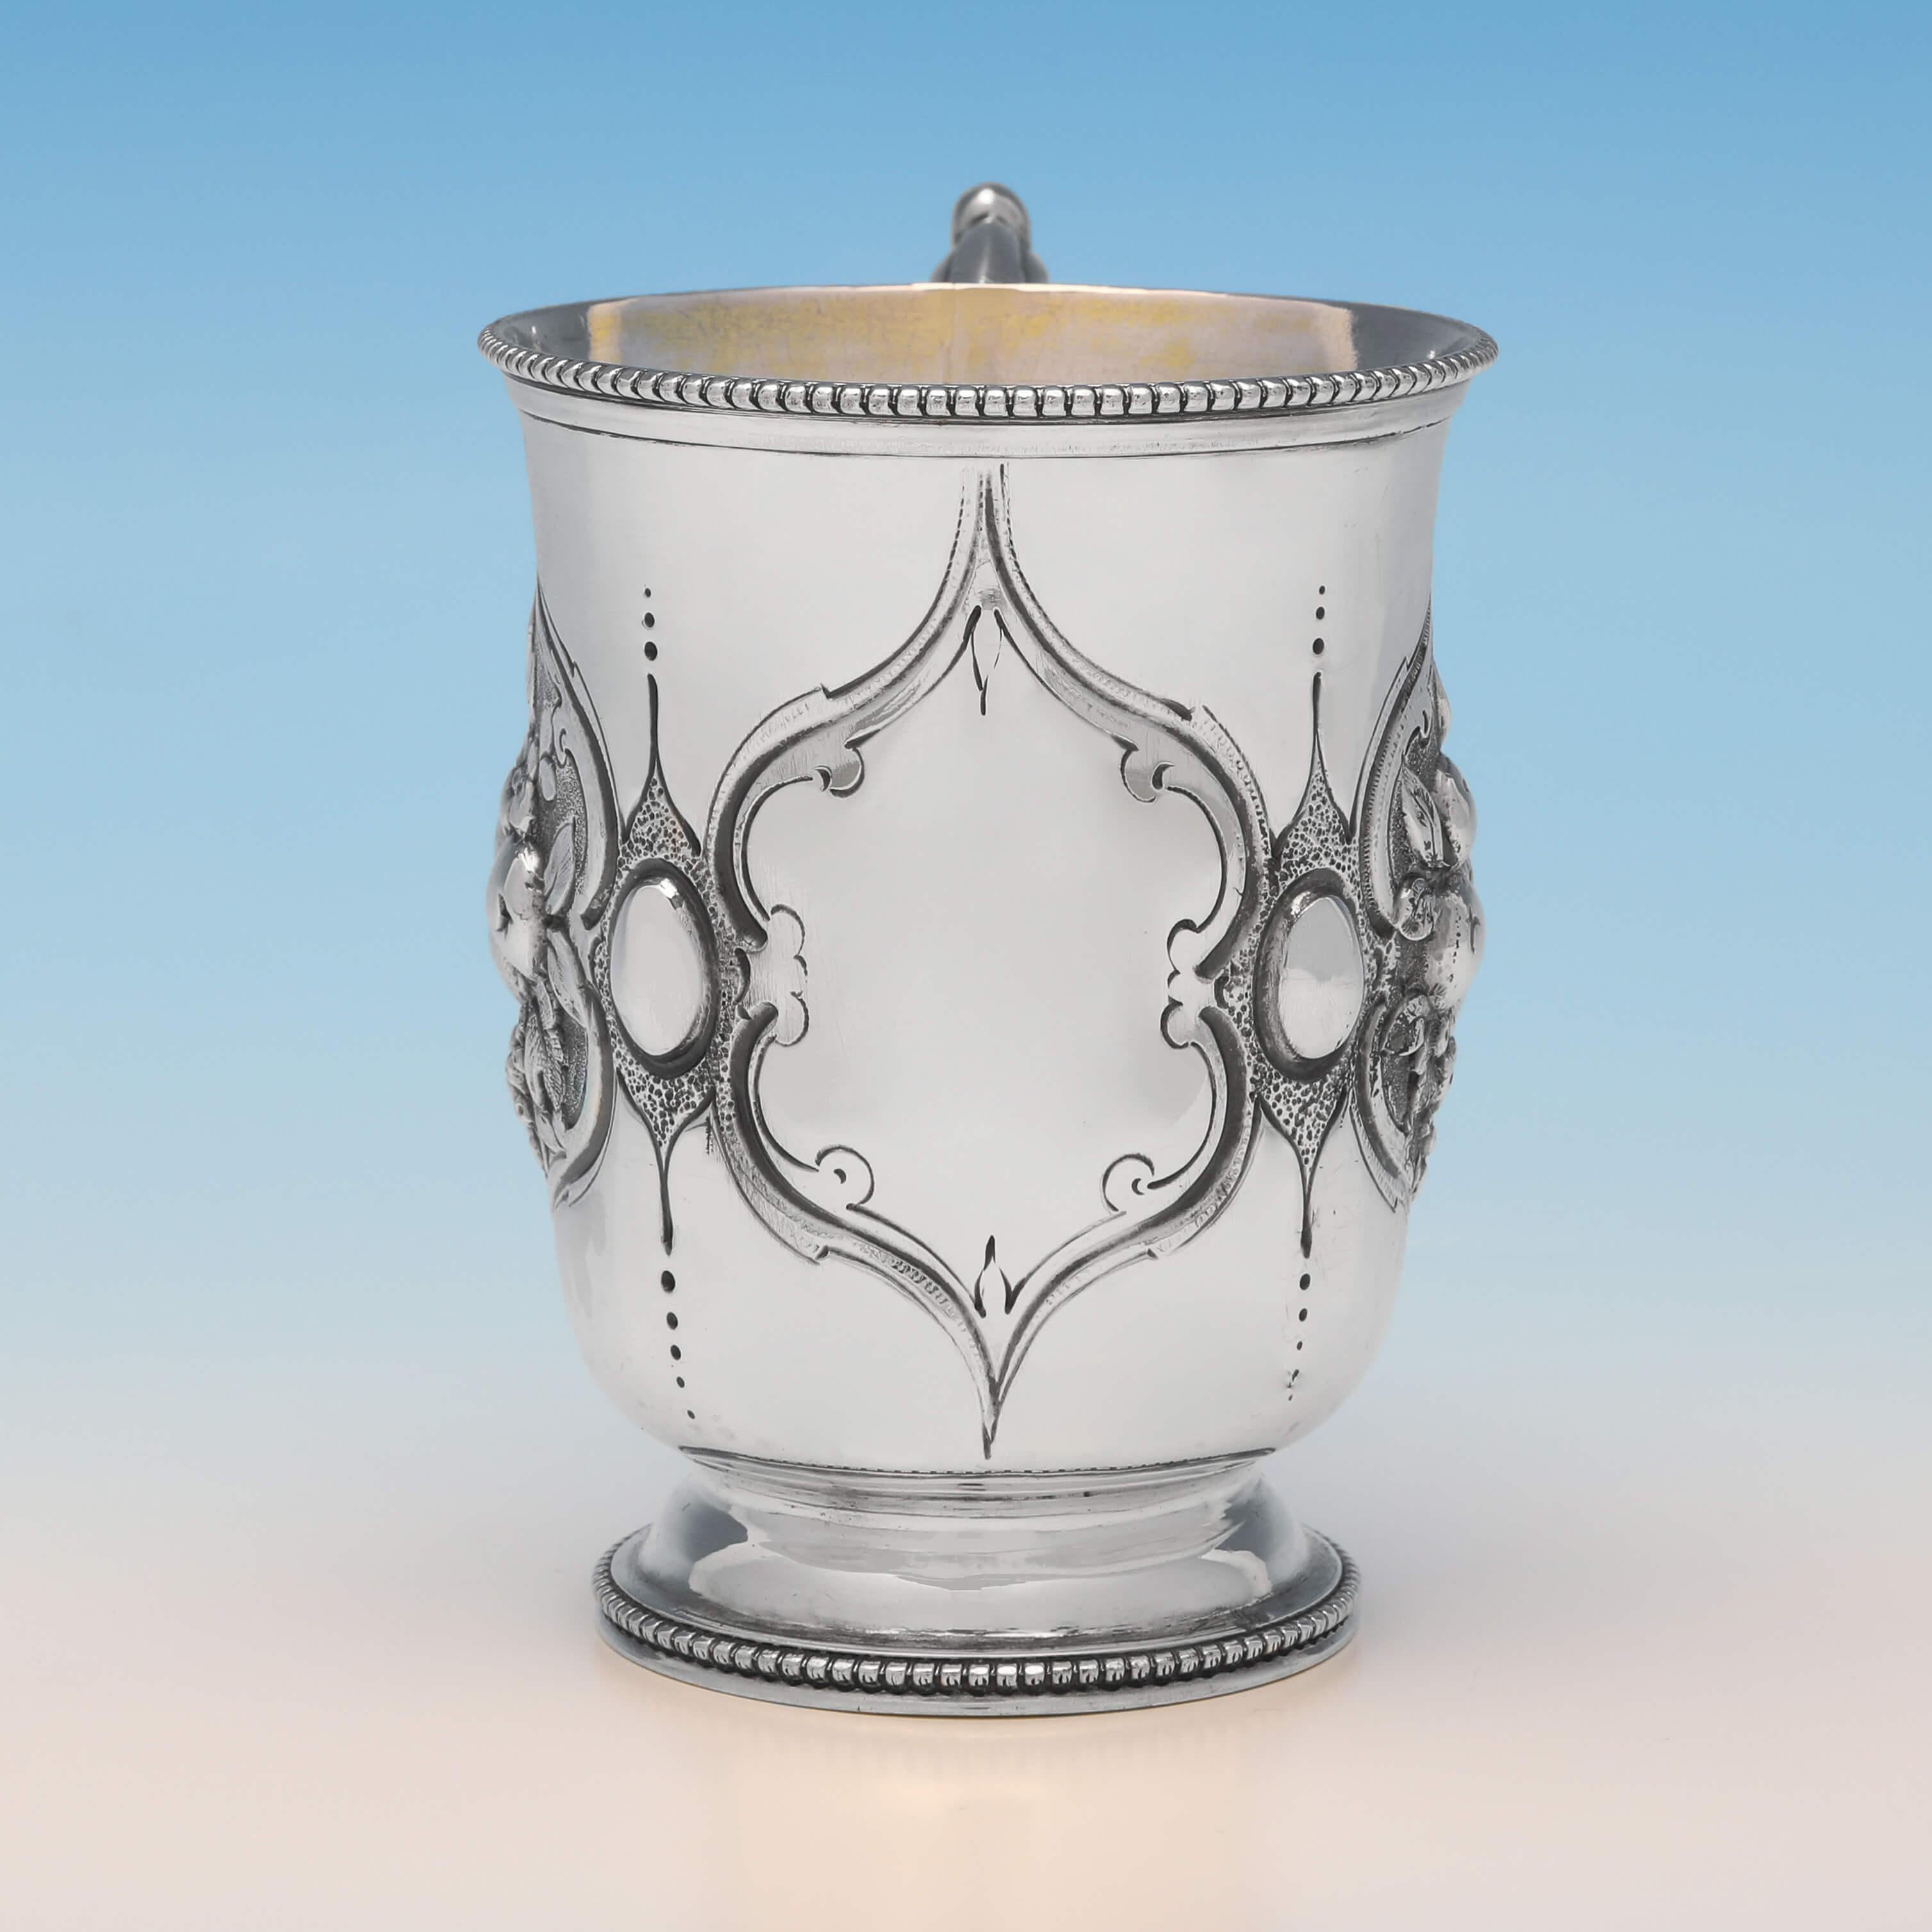 Hallmarked in London in 1866 by Henry Holland, this very attractive, Victorian, antique sterling silver christening mug, features chased and engraved decoration to the sides, a gilt interior and bead borders. The christening mug measures